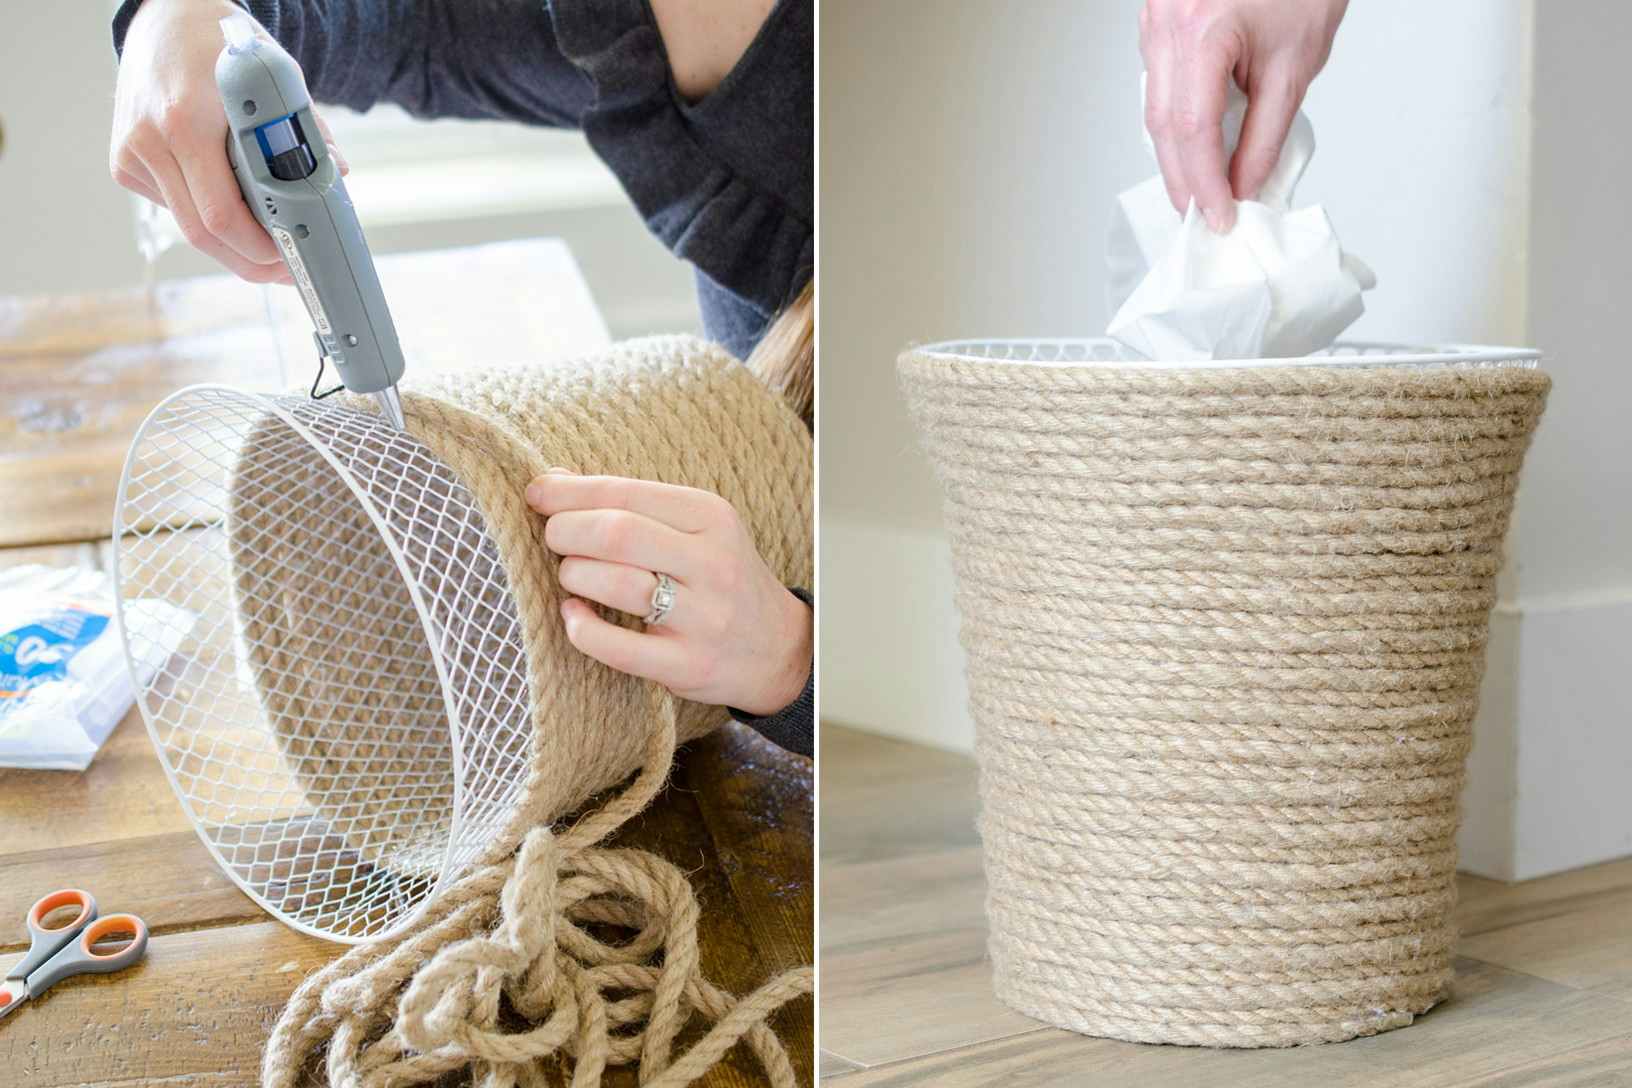 two images of a person using a hot glue and rope to transform a wire wastebasket